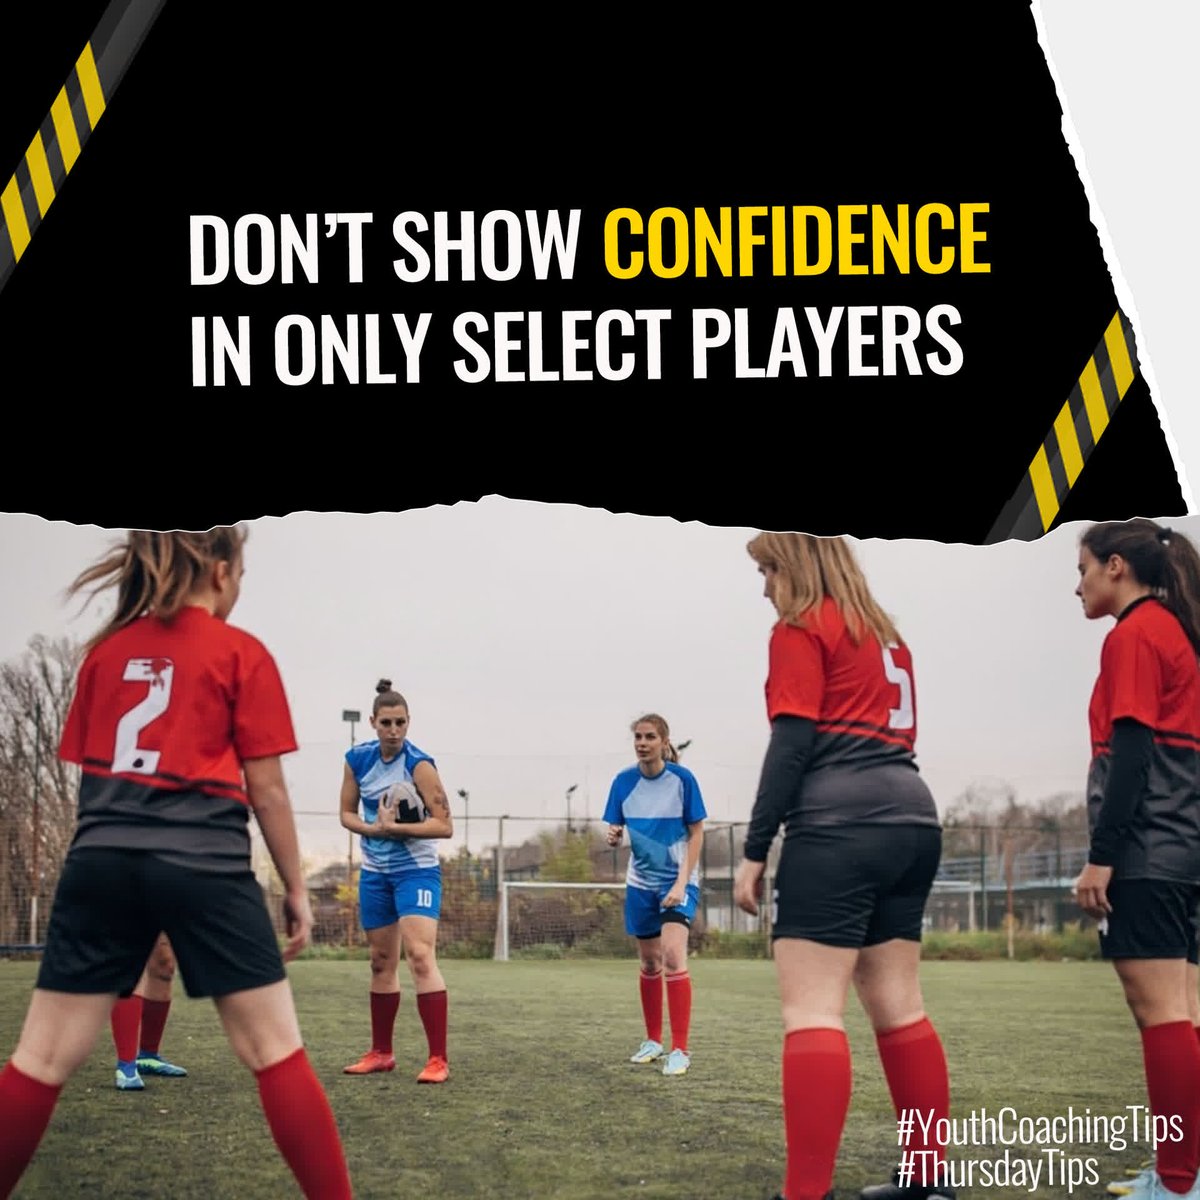 It's important to train all your team members to handle game situations, not just key players.  Build the confidence of all players and let them know you believe in them. 

#PositiveCoaching #Teamwork